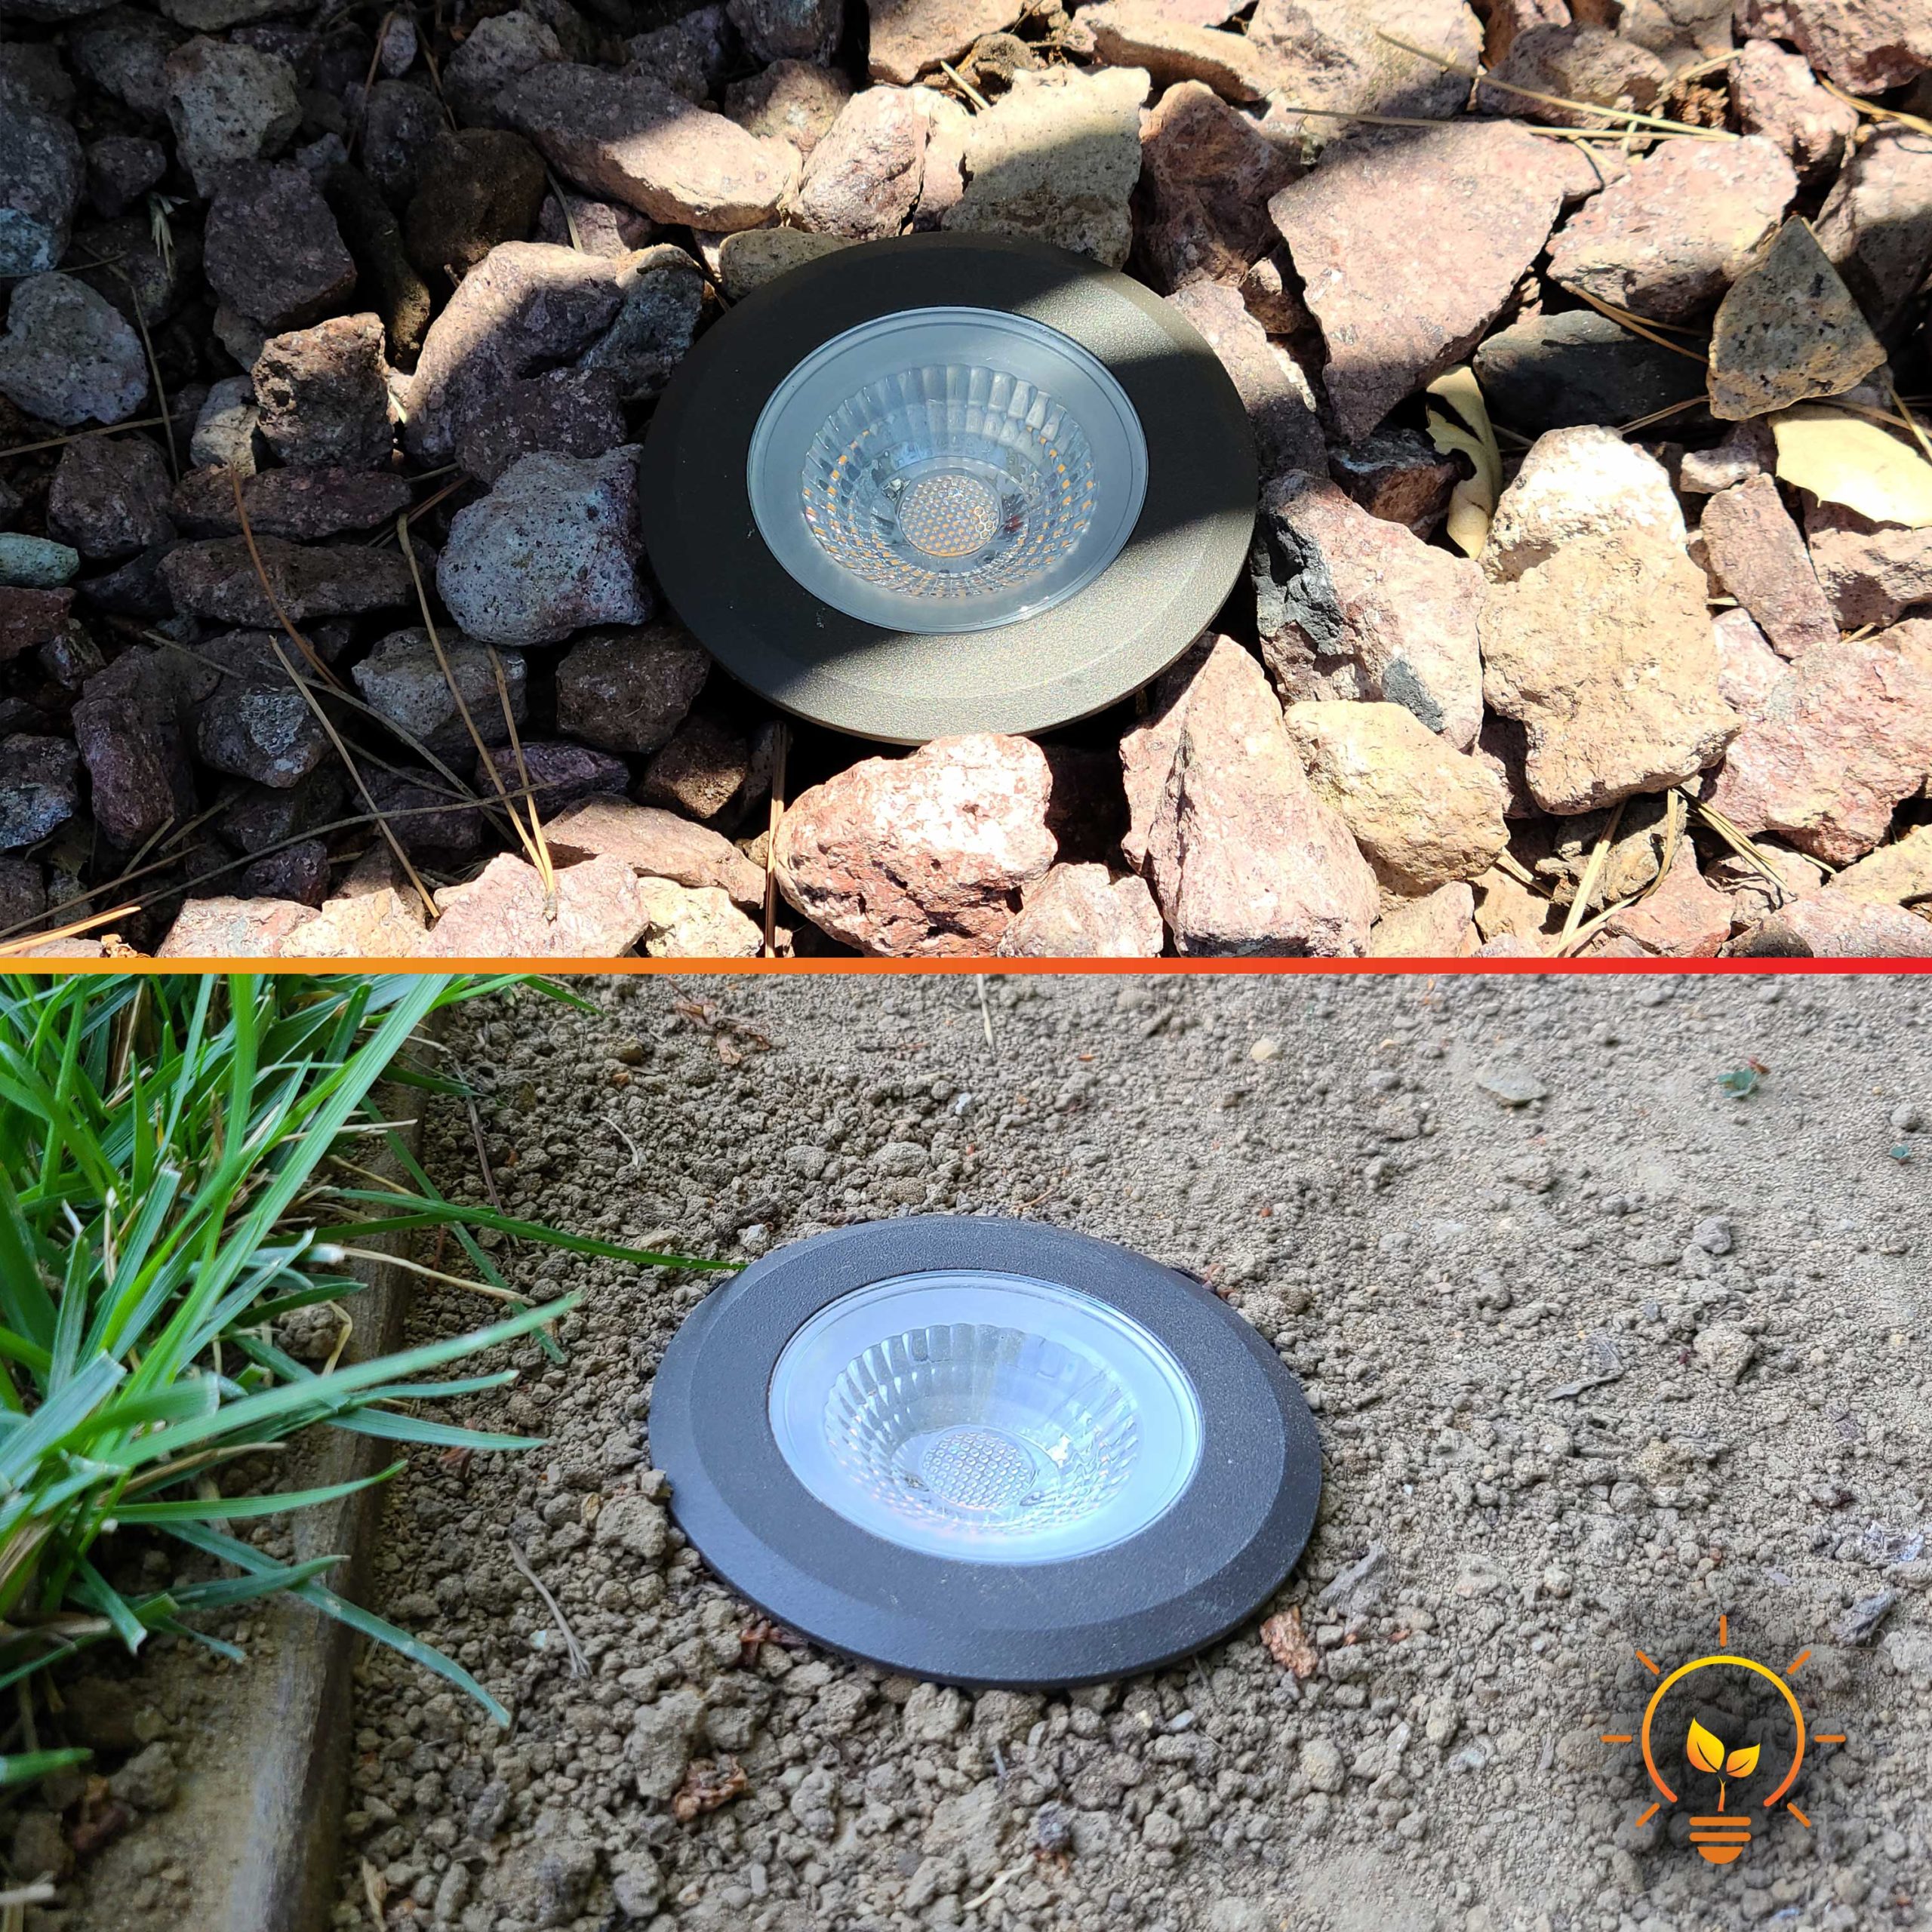 Lumengy 6w Led In Ground Landscape, How To Terminate Landscape Lighting